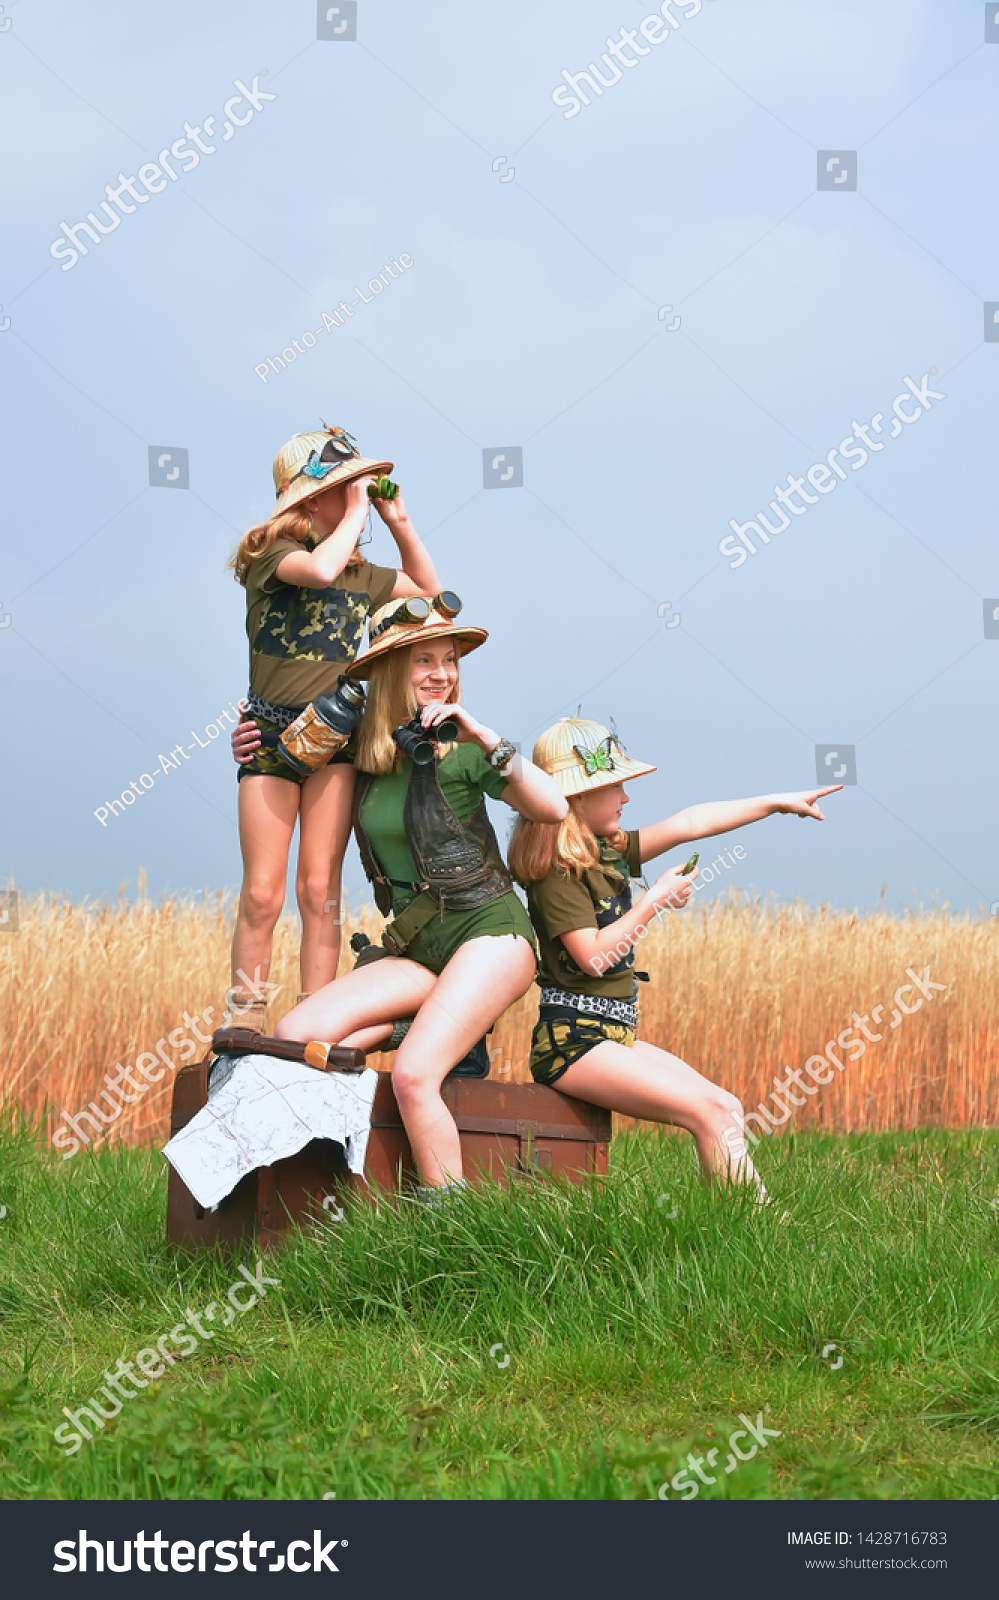 Twin young sisters and an adult girl dress up as explorers.
They pose in the outdoors dressed with jungle hats and
khaki safari clothes. #1428716783